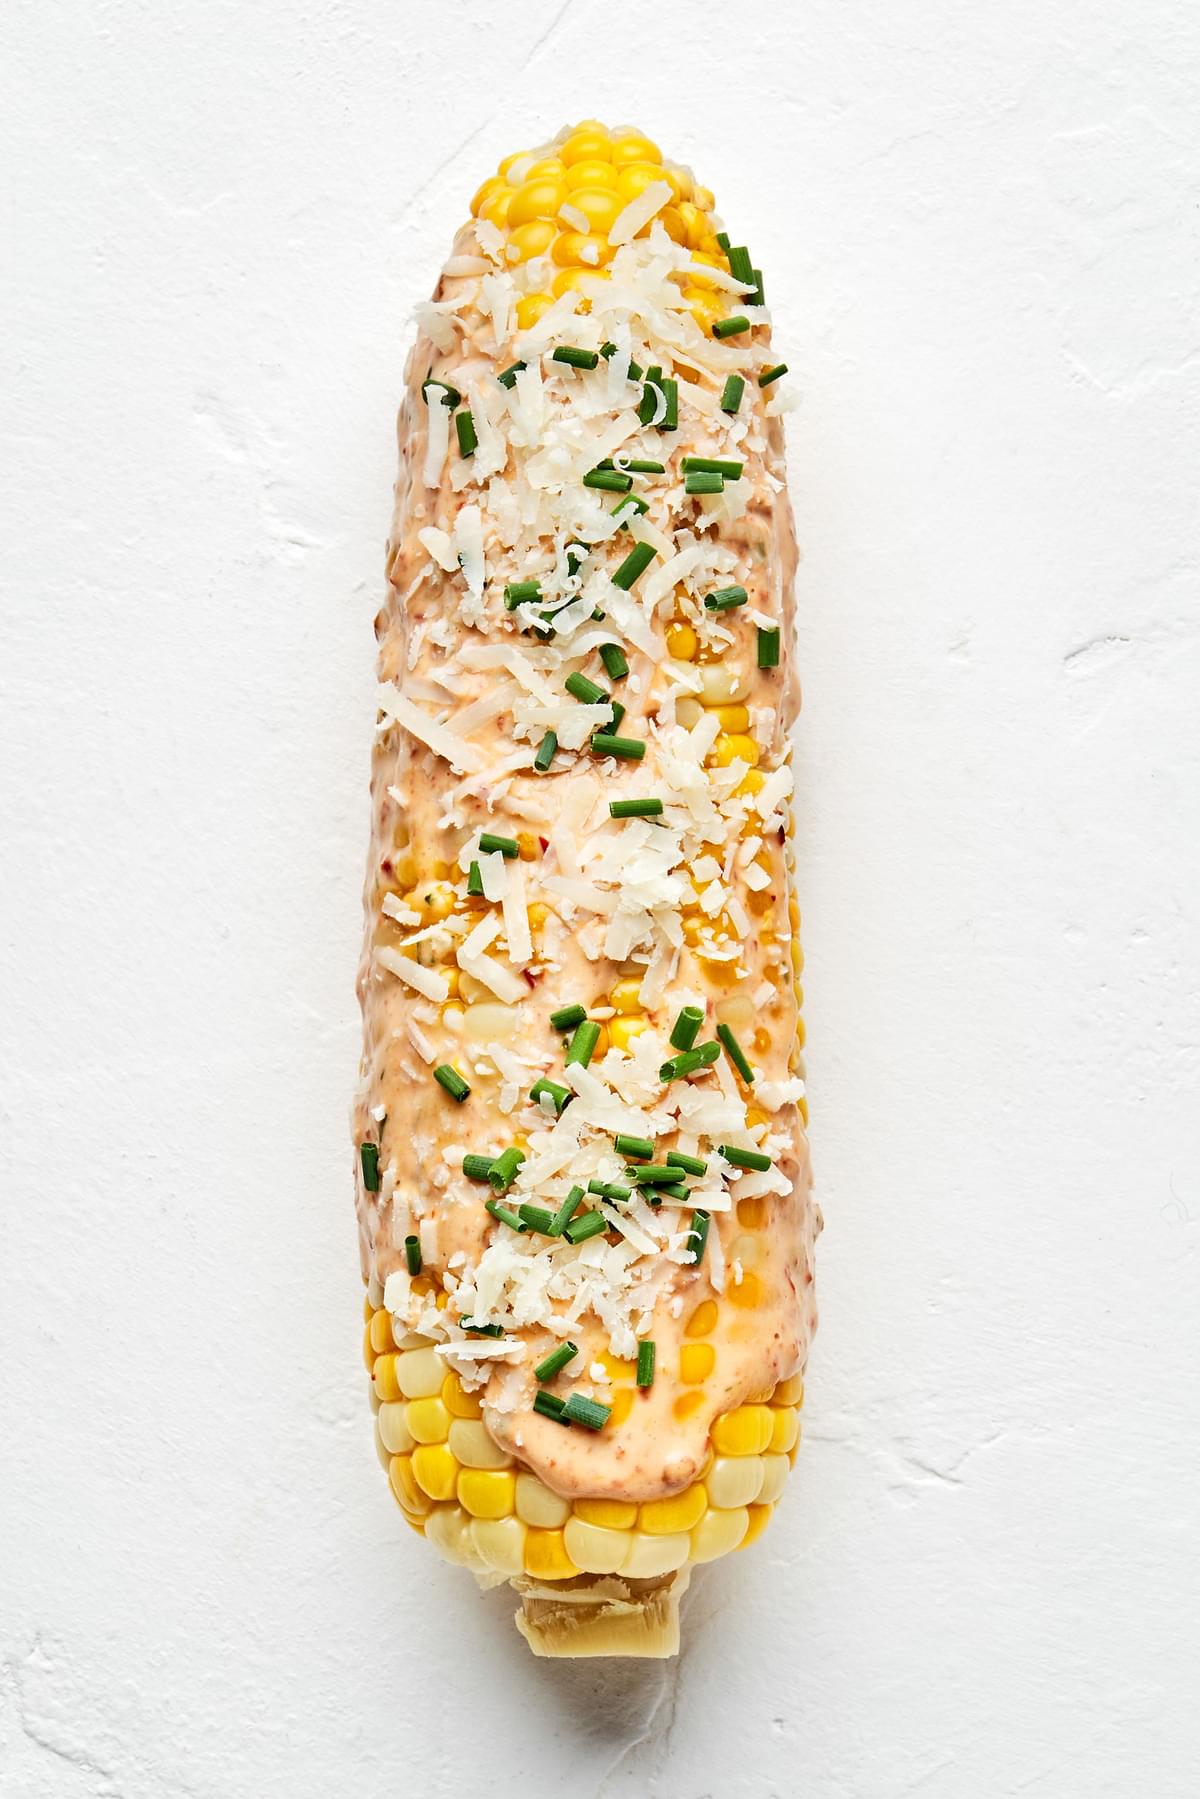 1 grilled corn on the cob with Chipotle Mayo, Parmesan Cheese and minced cilantro